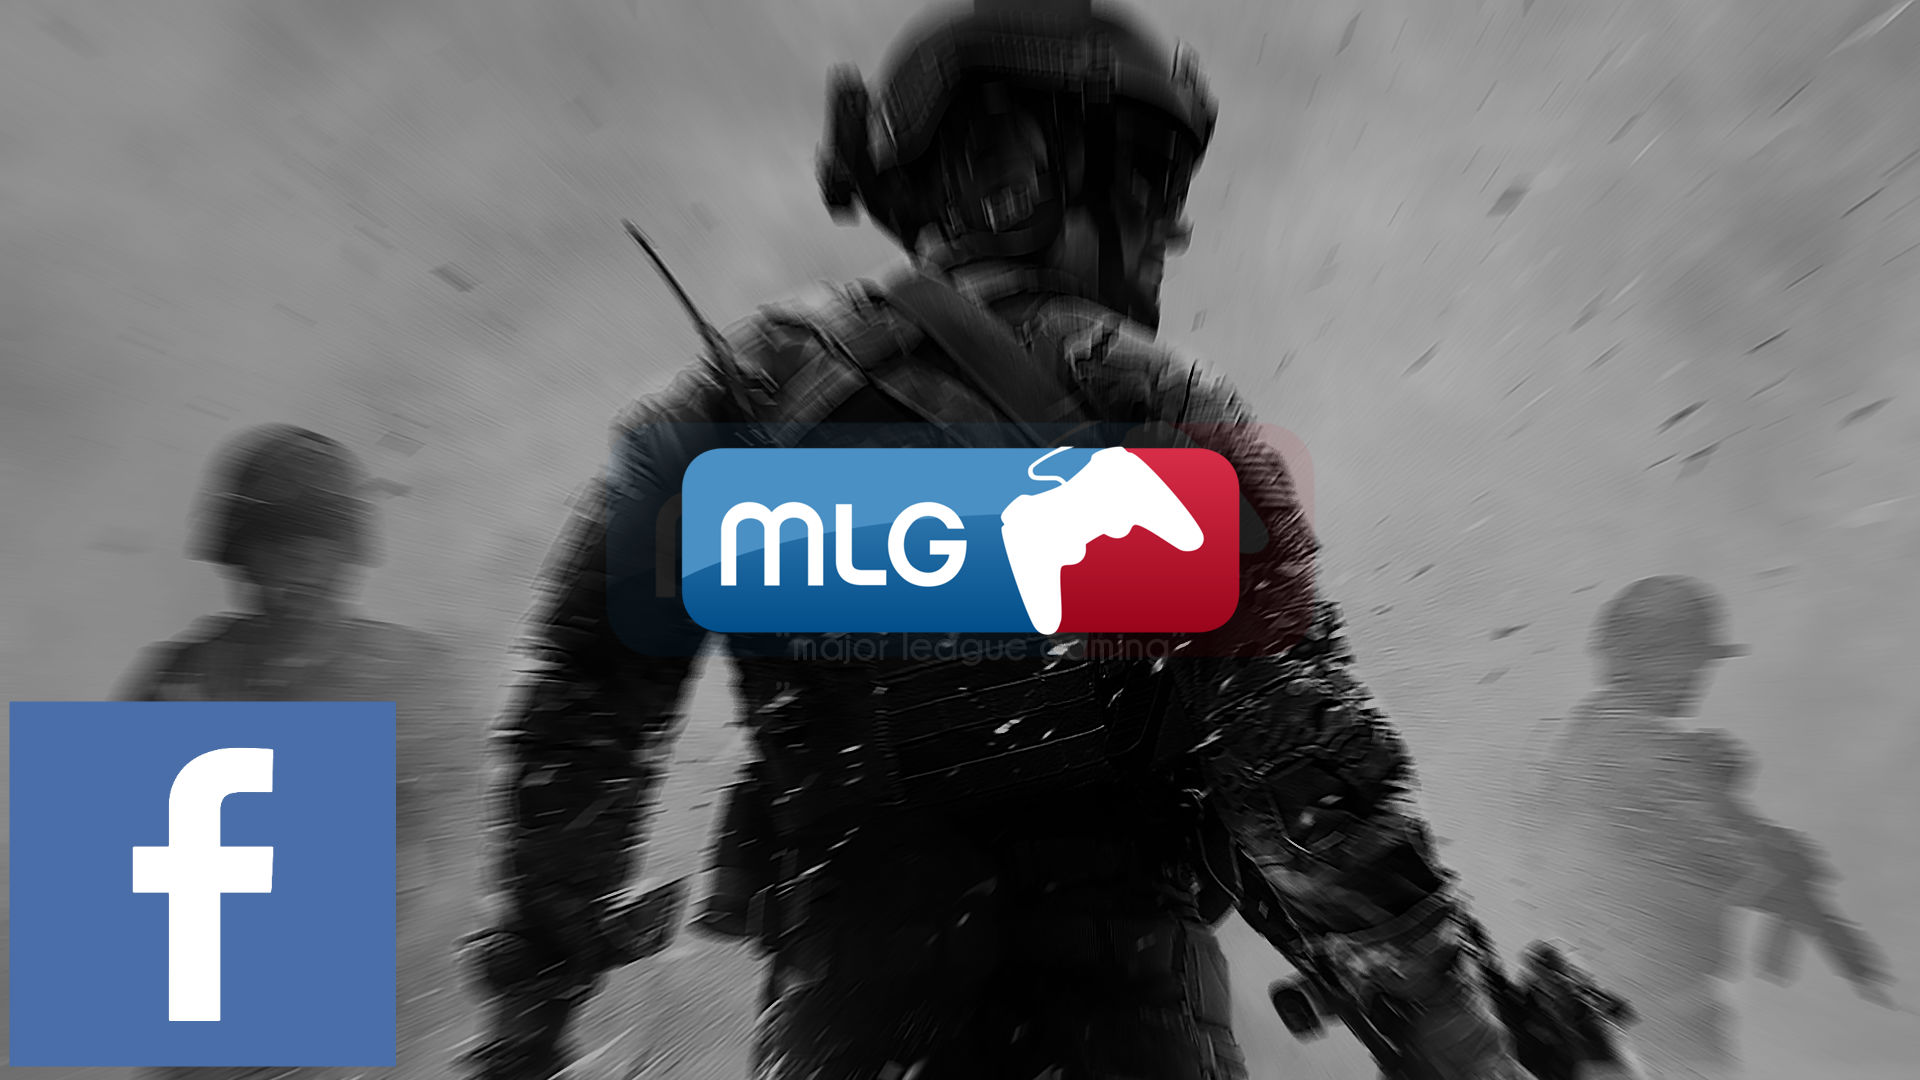 Partners With Major League Gaming For Esports